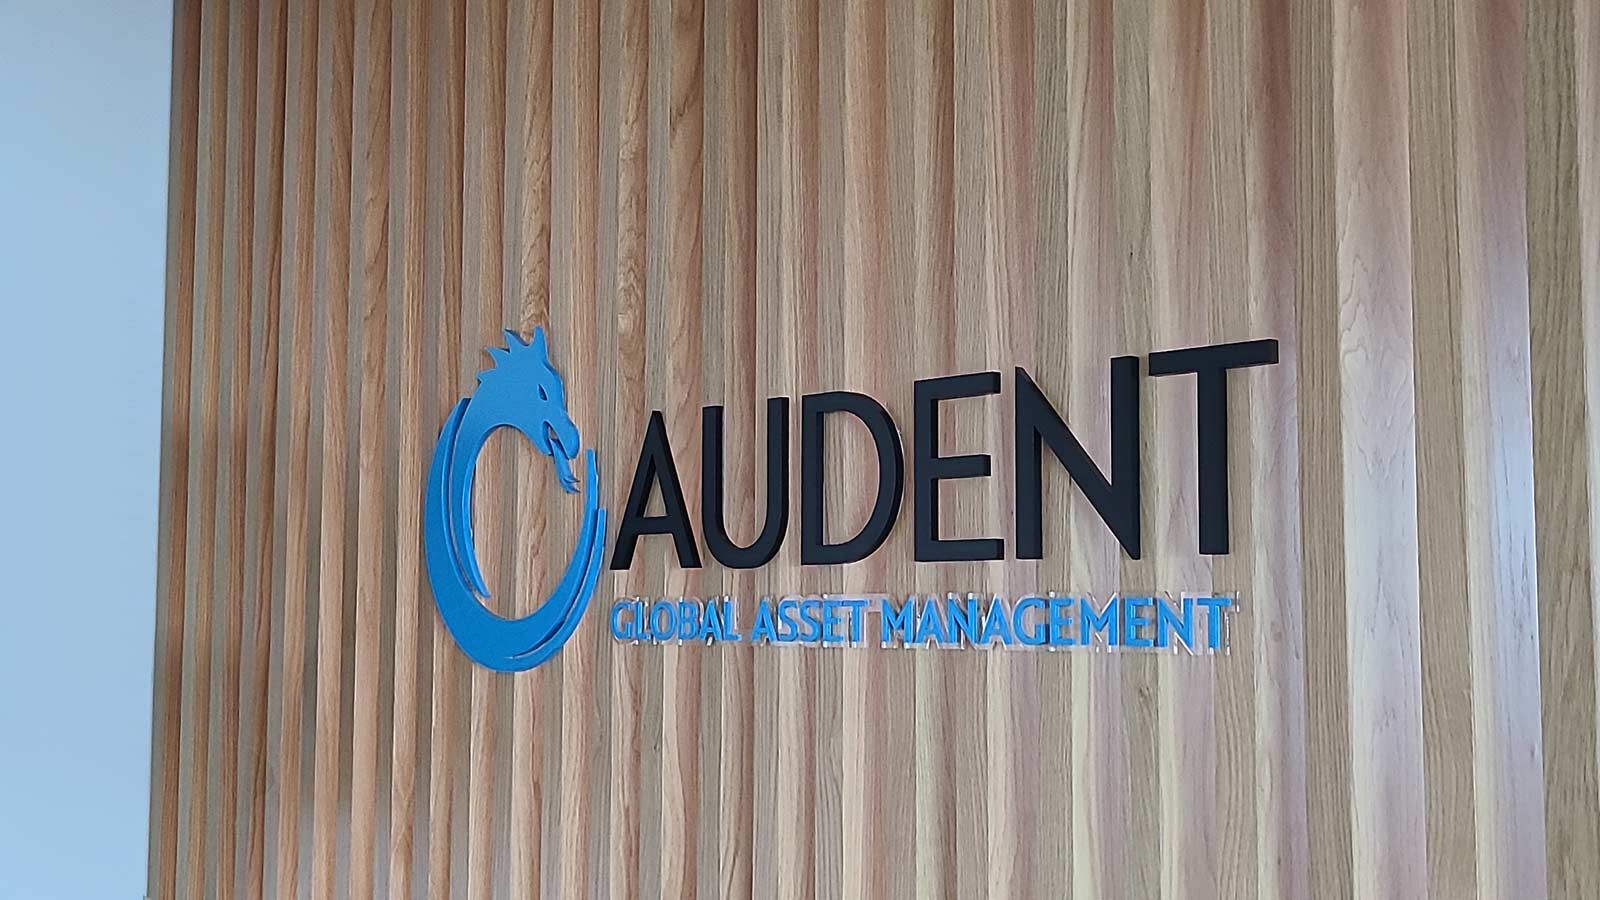 Audent Global Asset Management acrylic sign on a wall